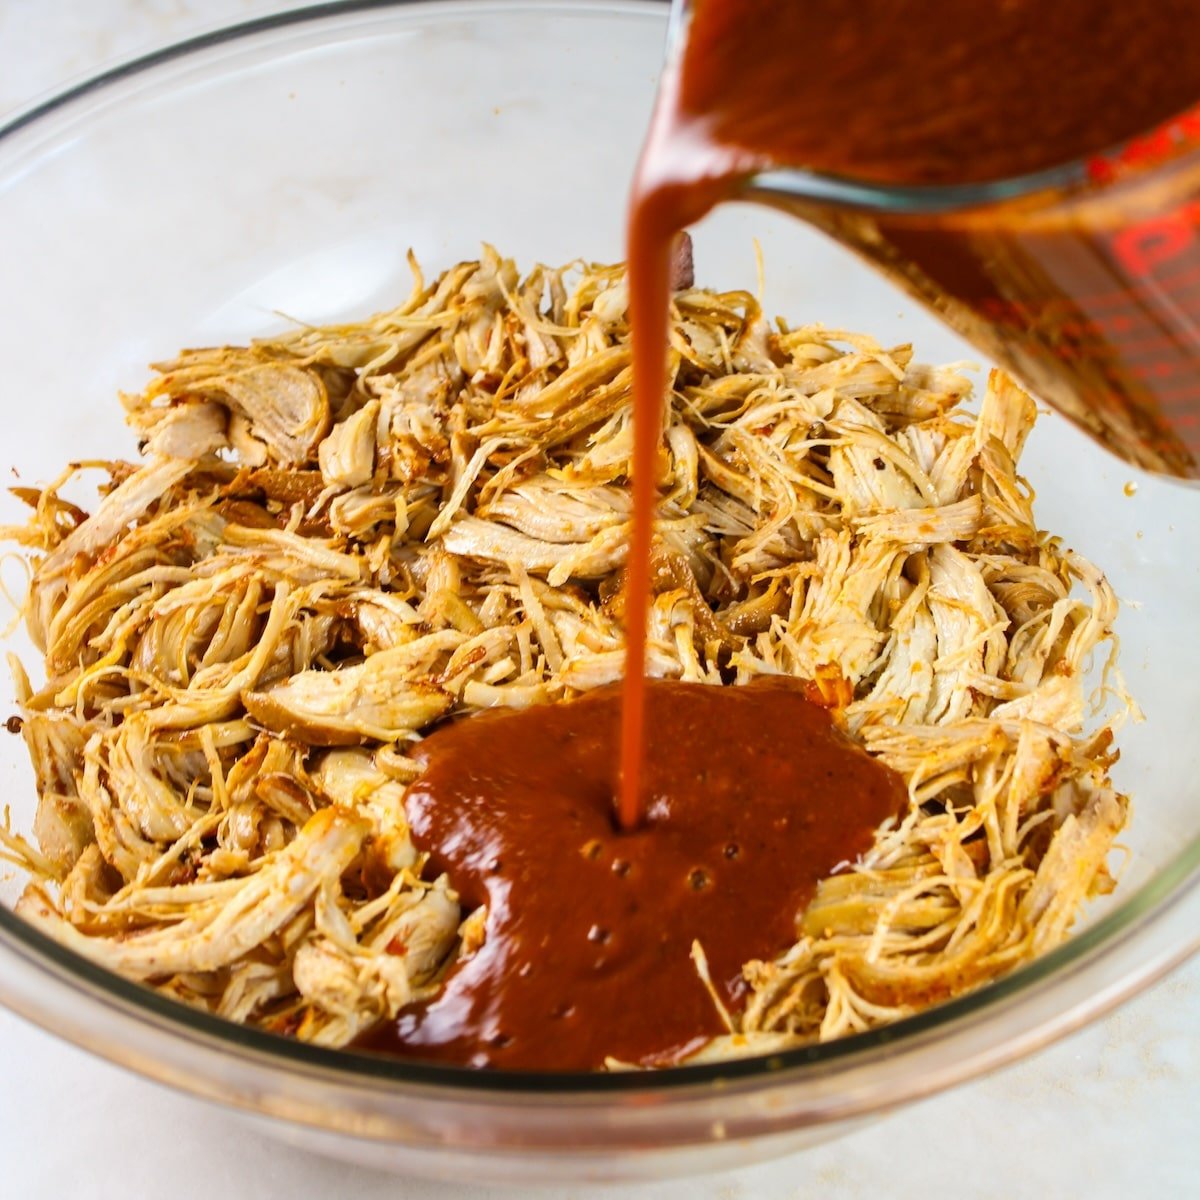 Pouring the sauce over the shredded chicken.